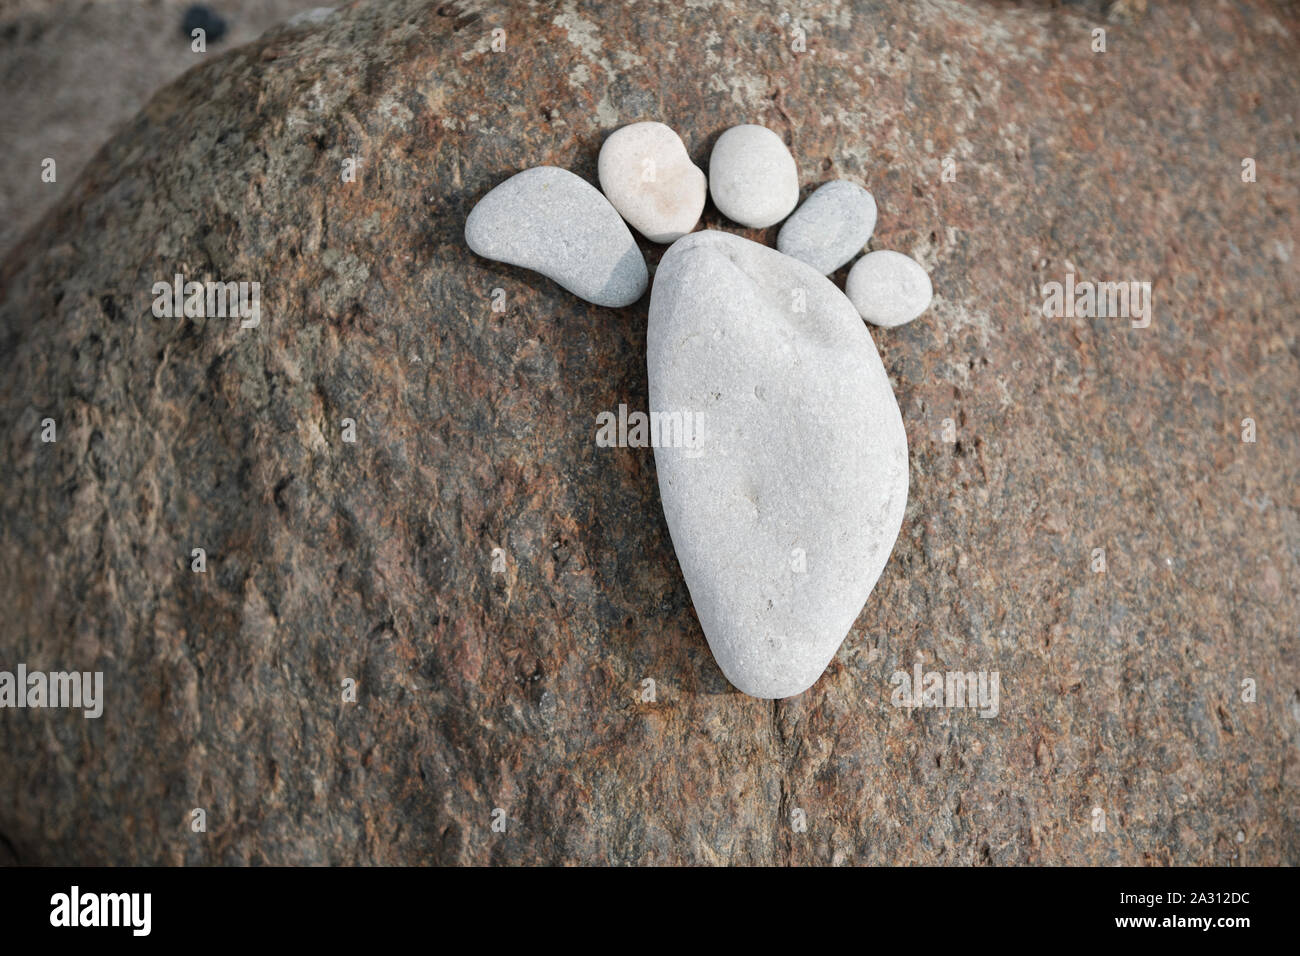 a footprint of the right foot, composed of six flat stones, artistically draped onto a rock stone Stock Photo